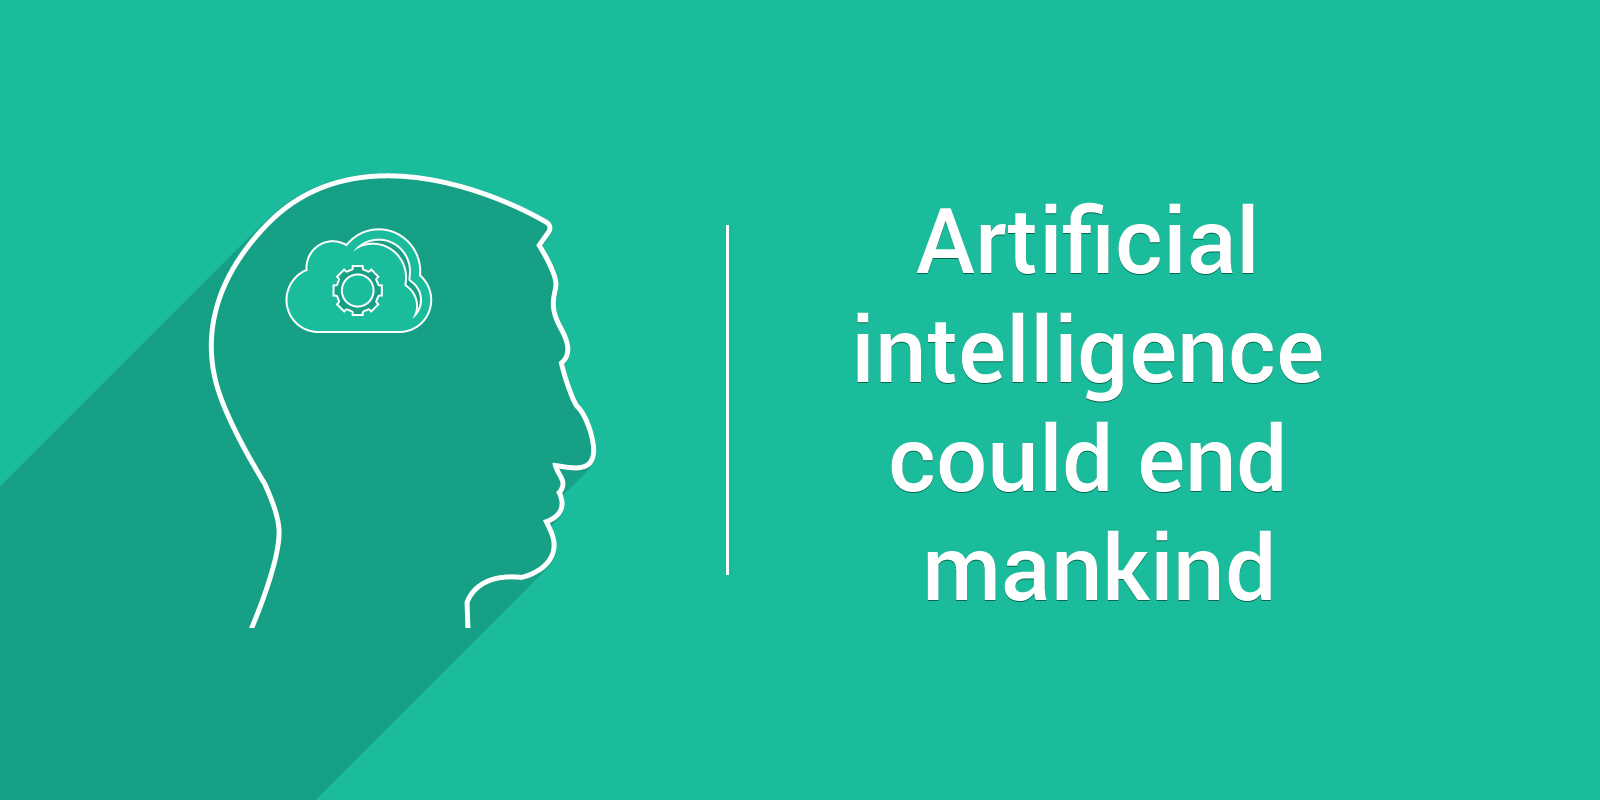 Artificial intelligence could end mankind